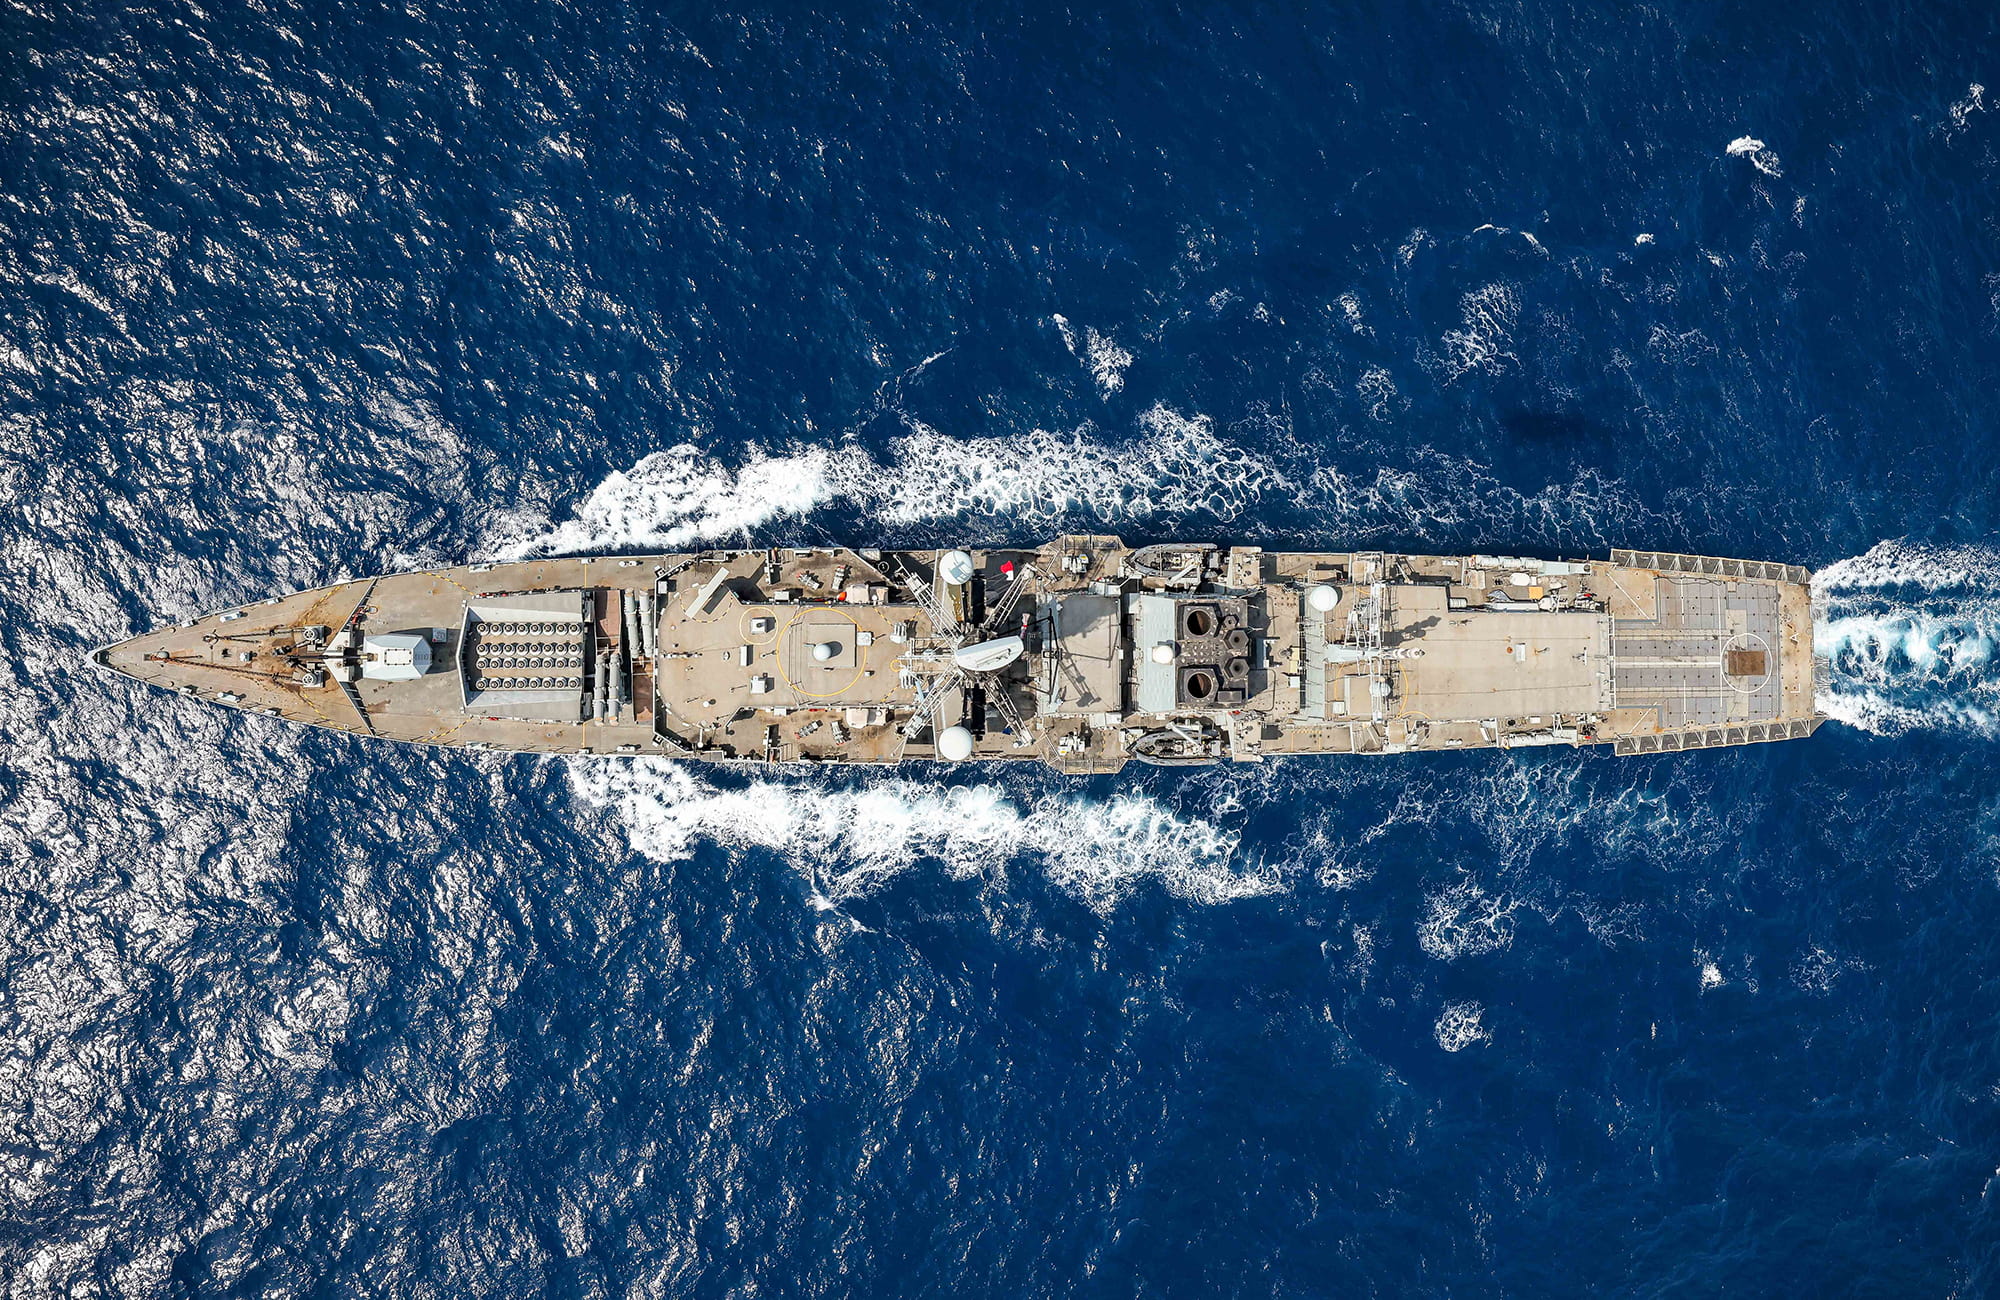 HMS Lancaster at sea, viewed from directly above